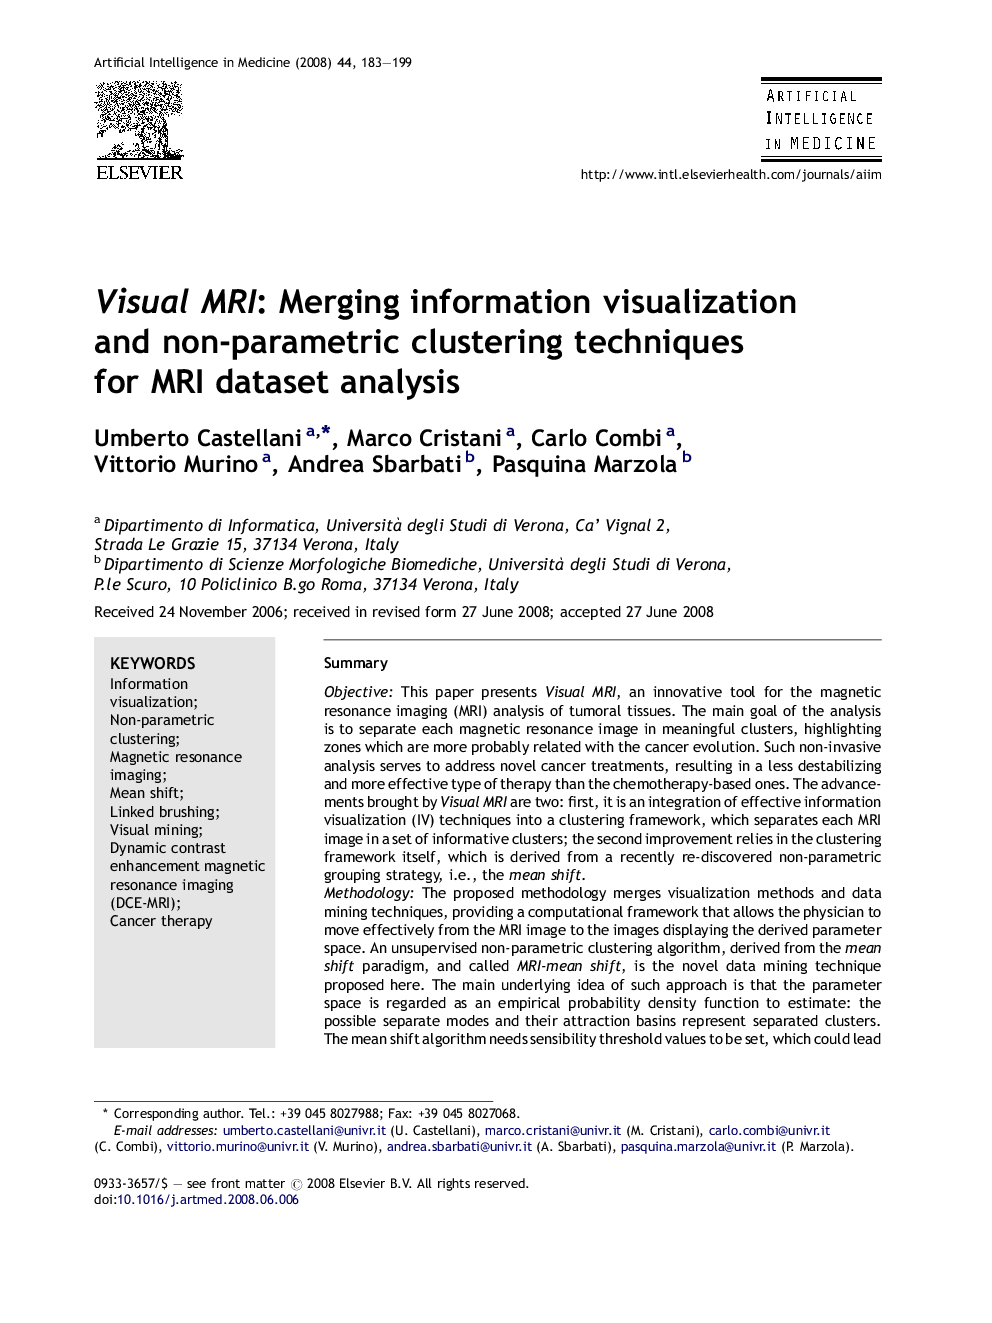 Visual MRI: Merging information visualization and non-parametric clustering techniques for MRI dataset analysis